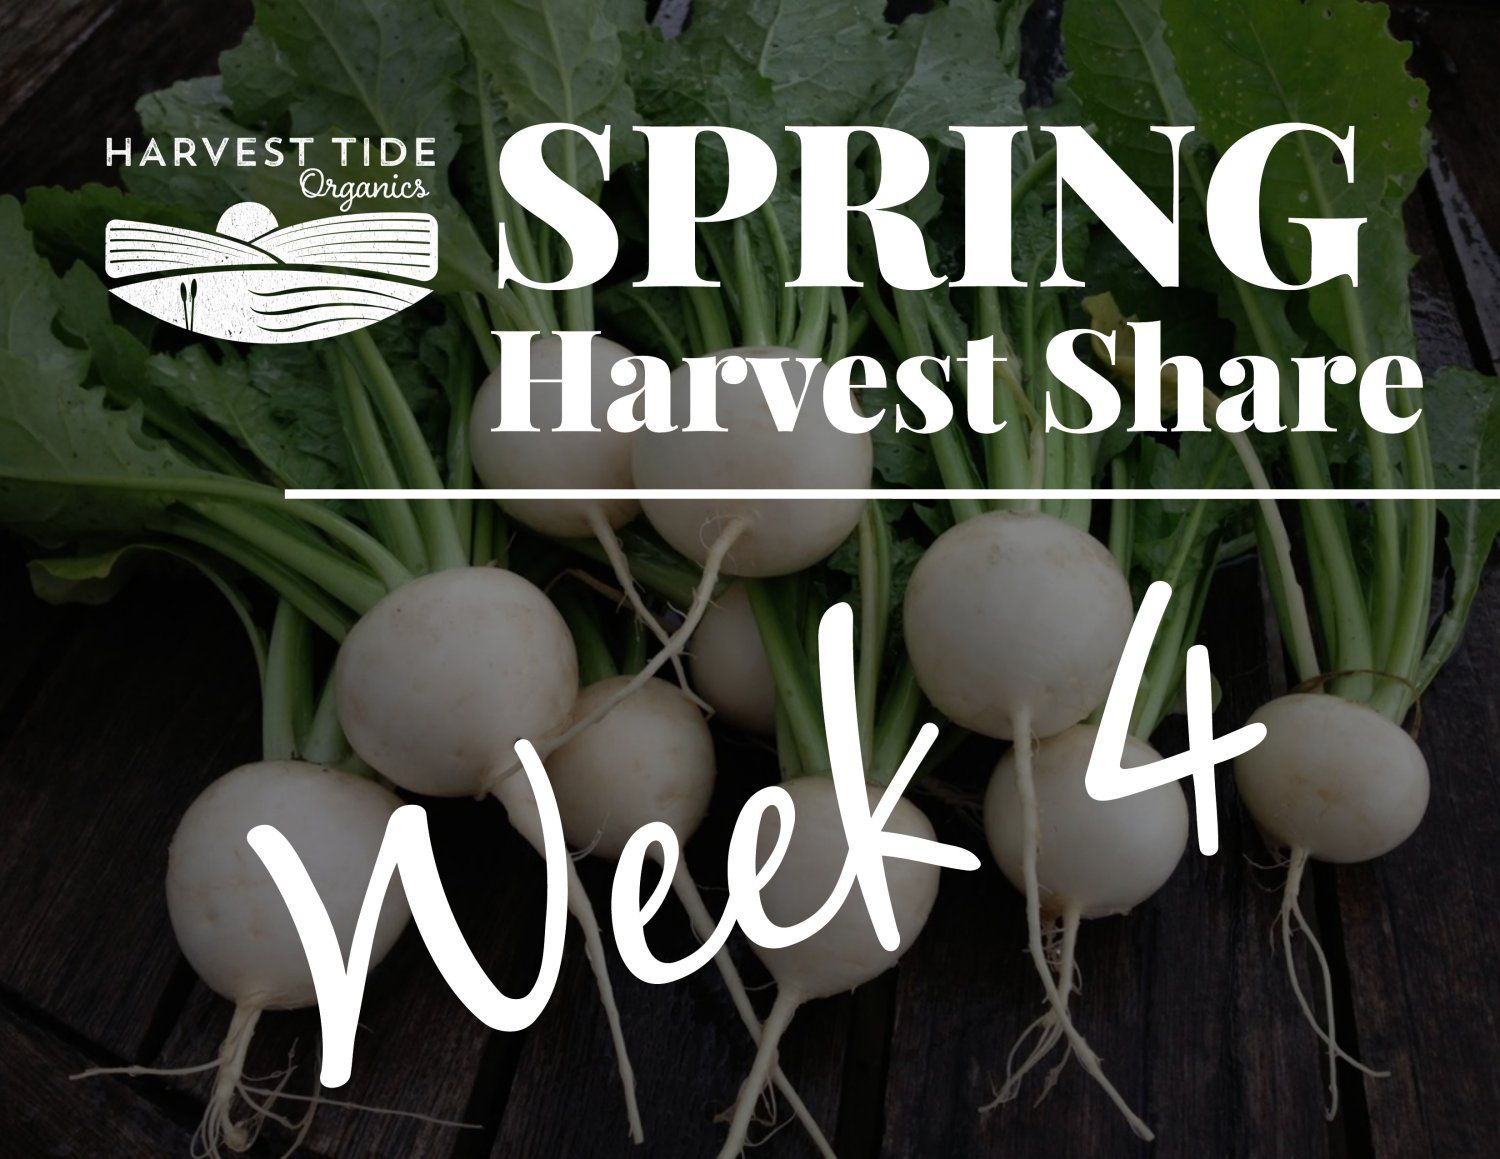 Previous Happening: Spring Harvest Share - Week 4